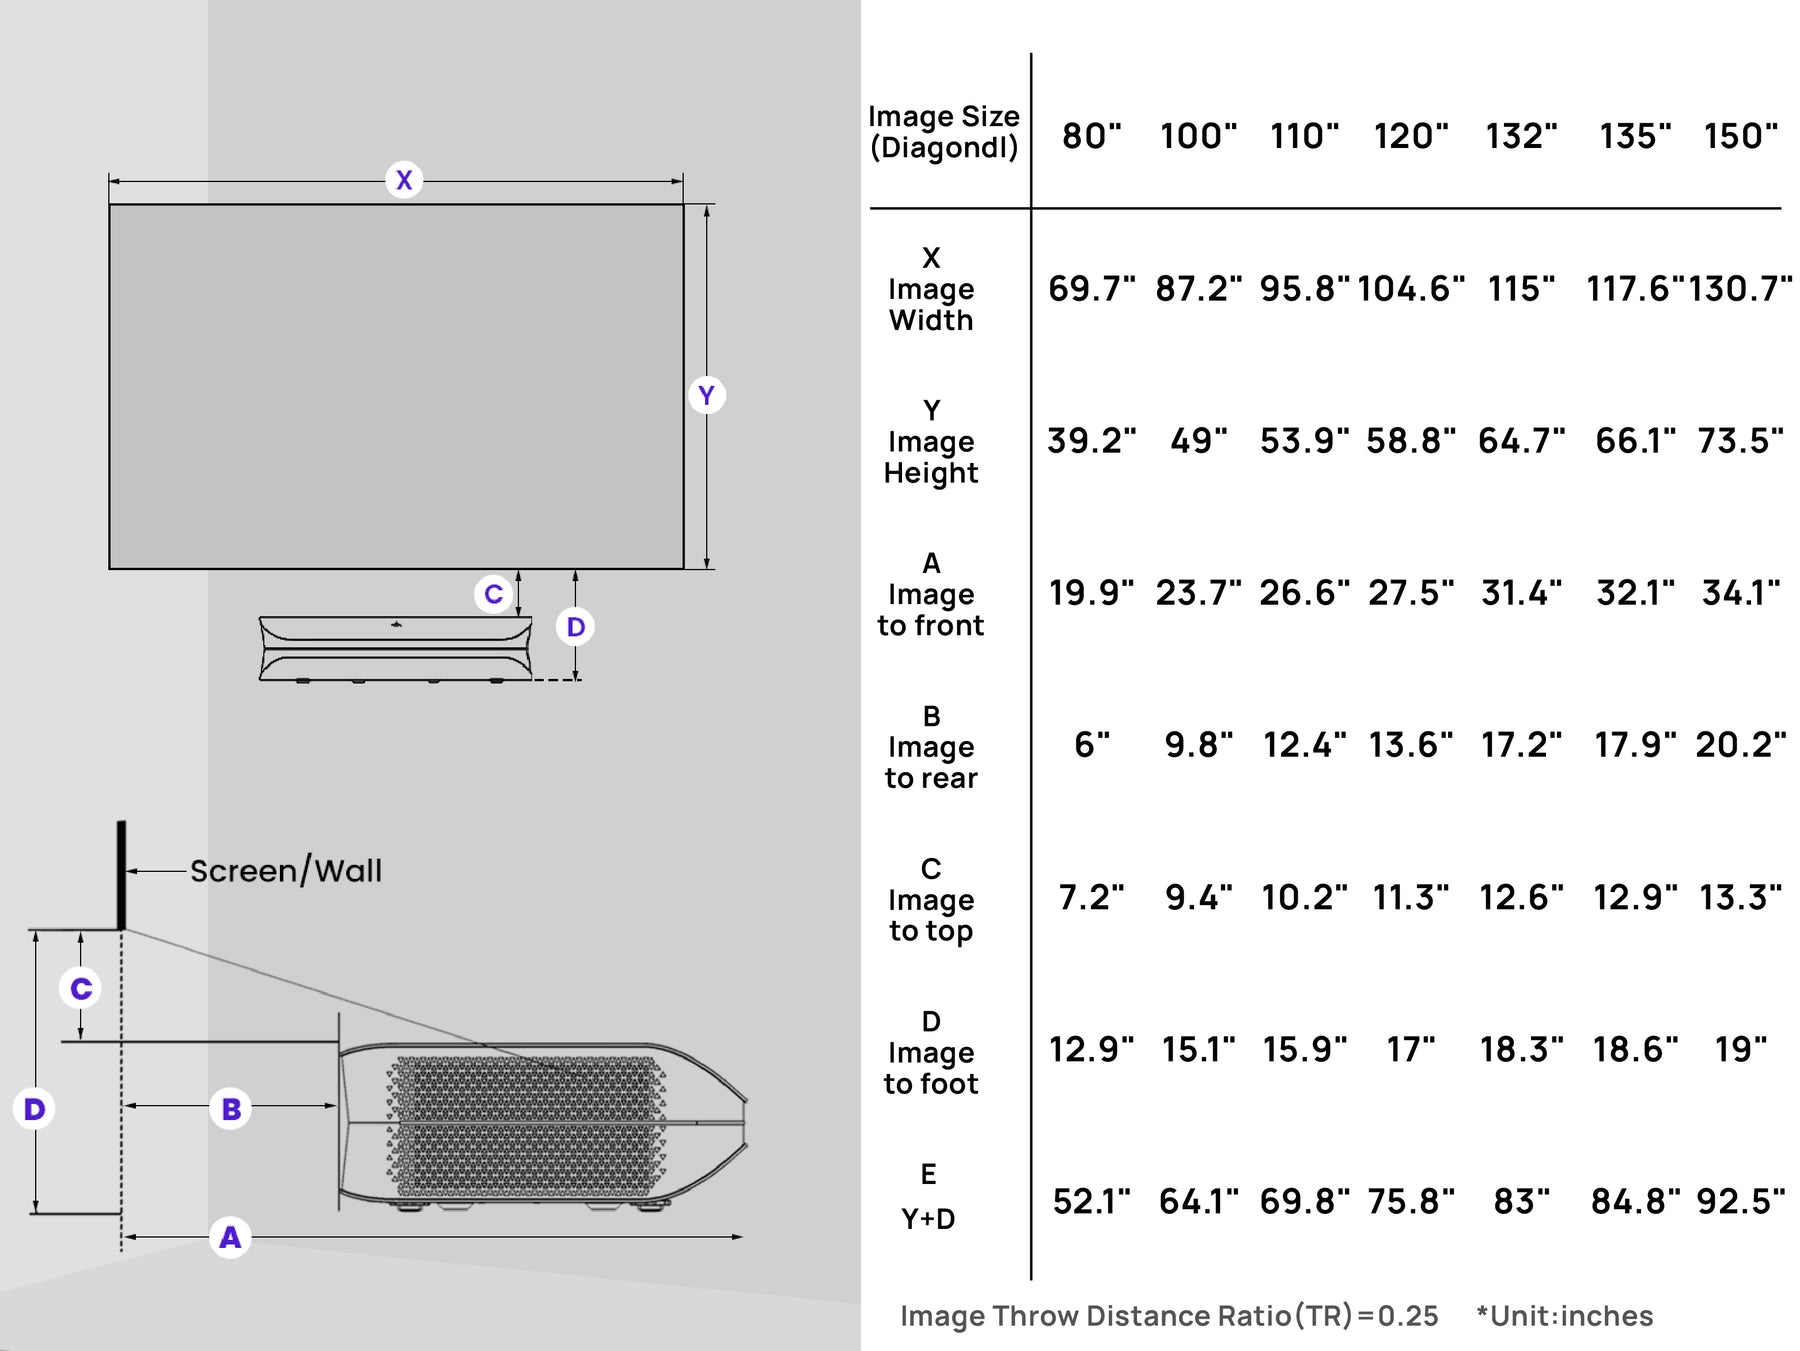 Dimensional guide for LTV-2500 4K 3D Projector showing optimal image size and throw distance for home theaters.